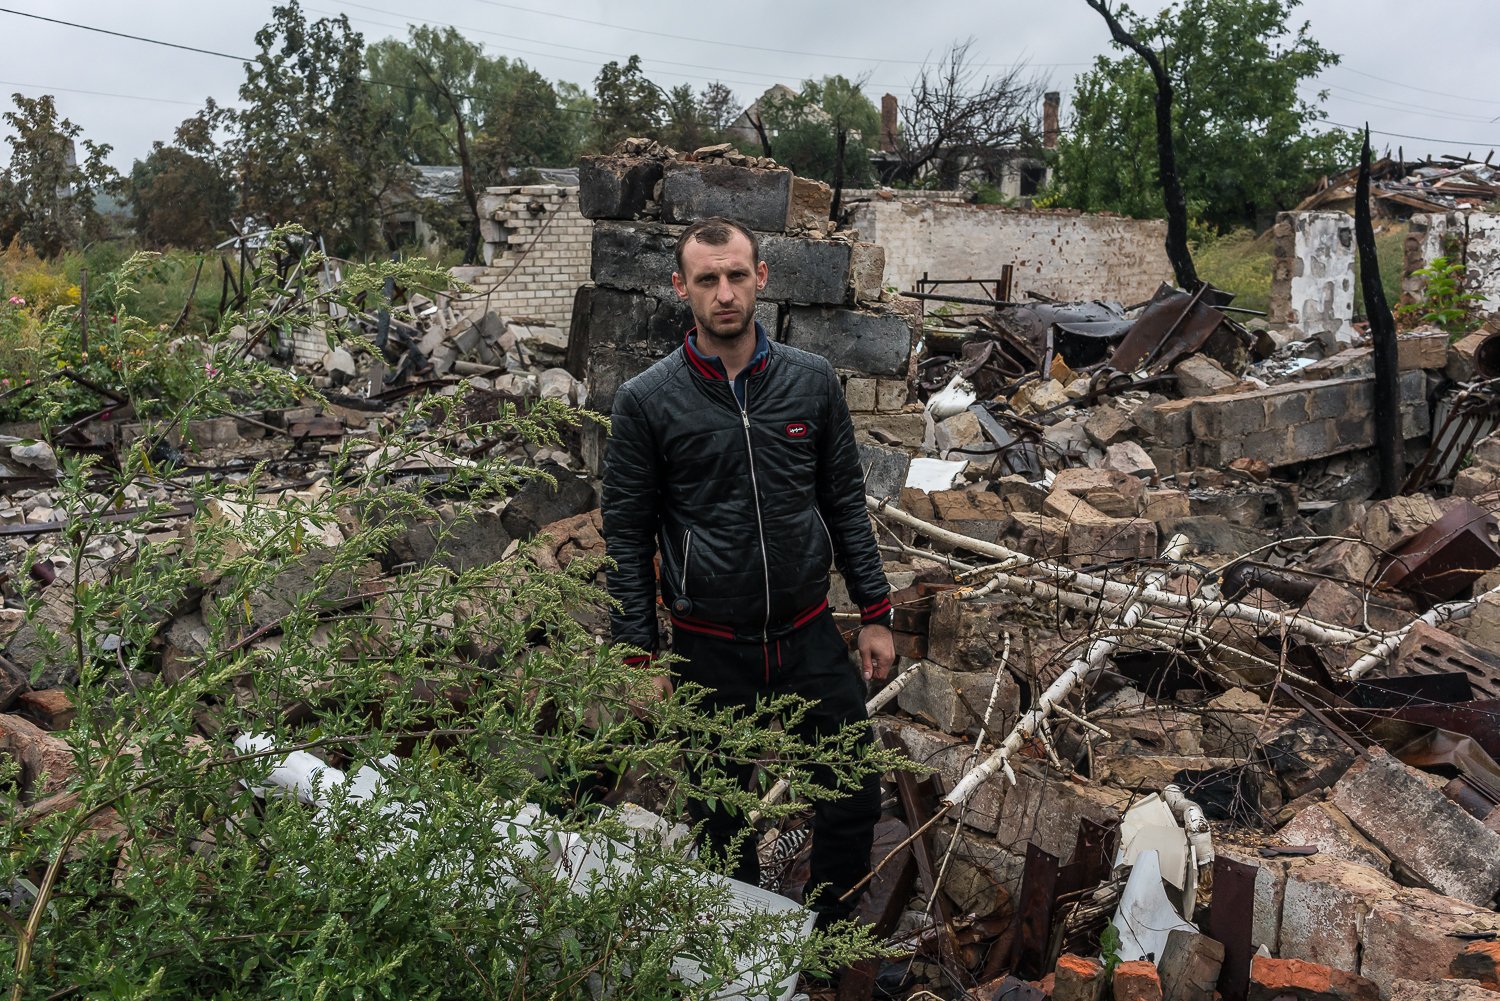  Oleksandr Bordey, one of the founders of the “Good Evening We’re From Ukraine” charity fund, poses for a portrait in a neighborhood that was heavily damaged by fighting during the early weeks of the Russian invasion on Saturday, September 10, 2022 i